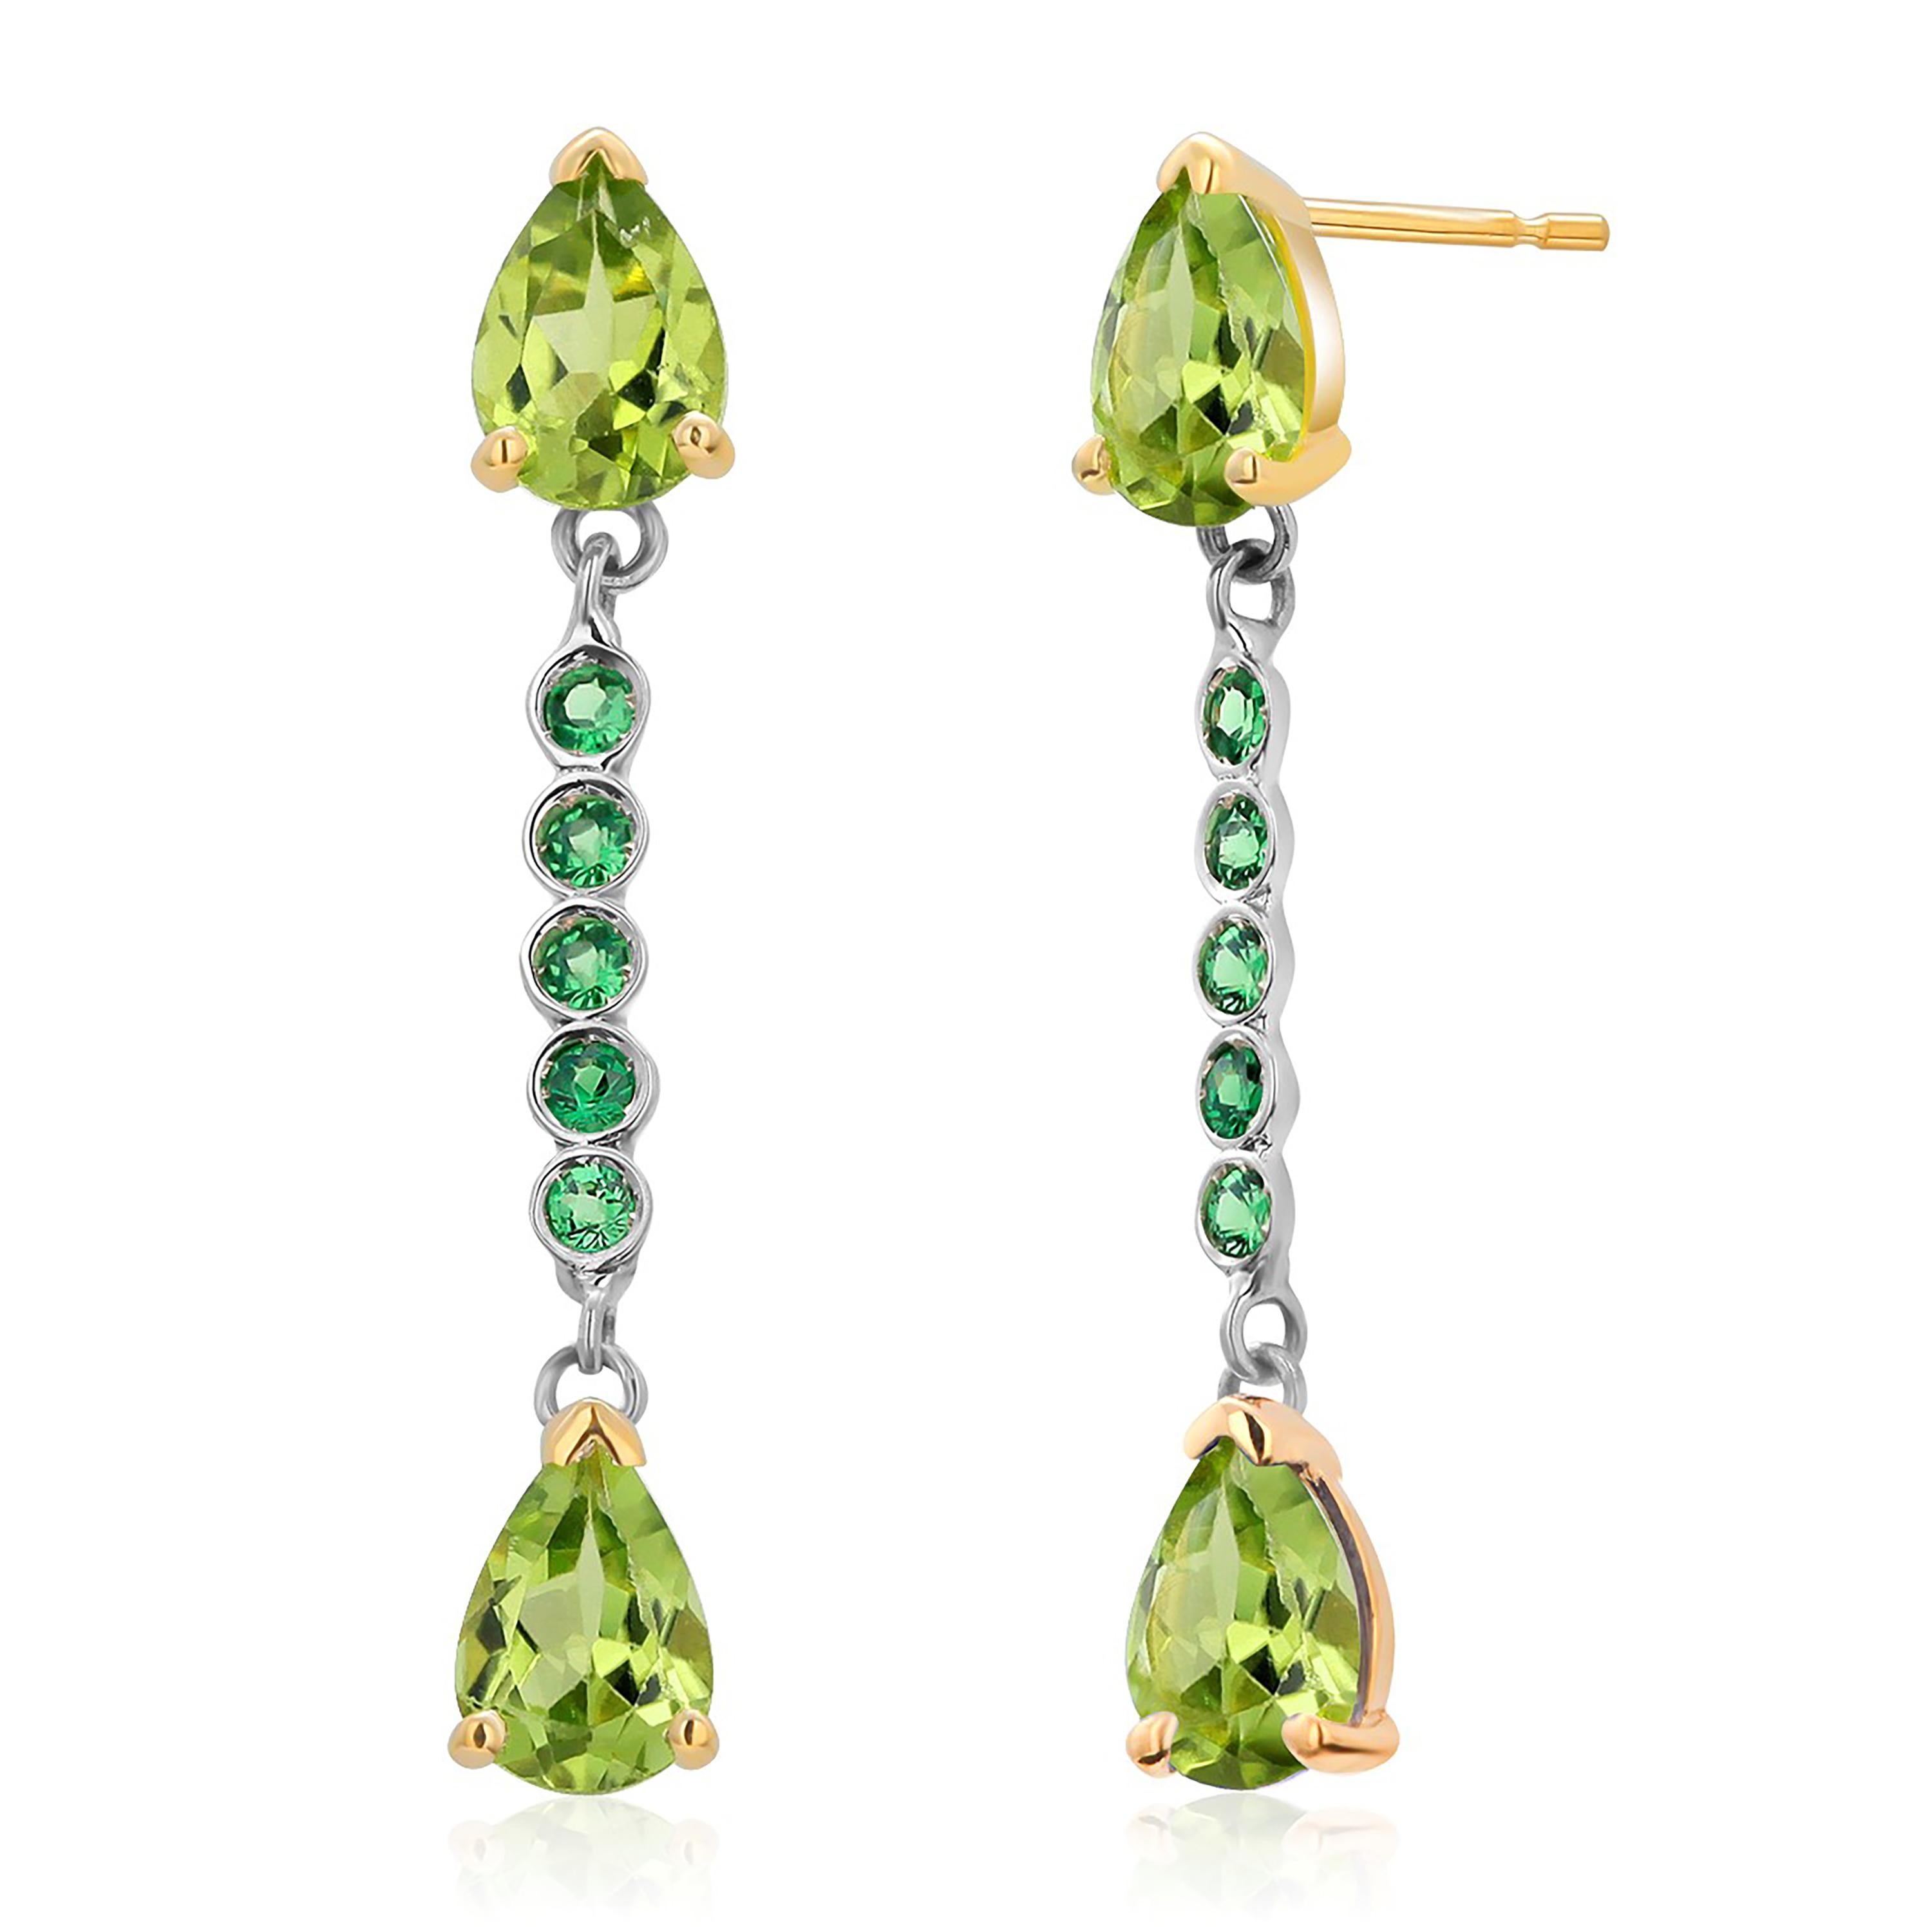 Contemporary Pear Shaped Peridot and Tsavorite Yellow and White Gold Drop Earrings